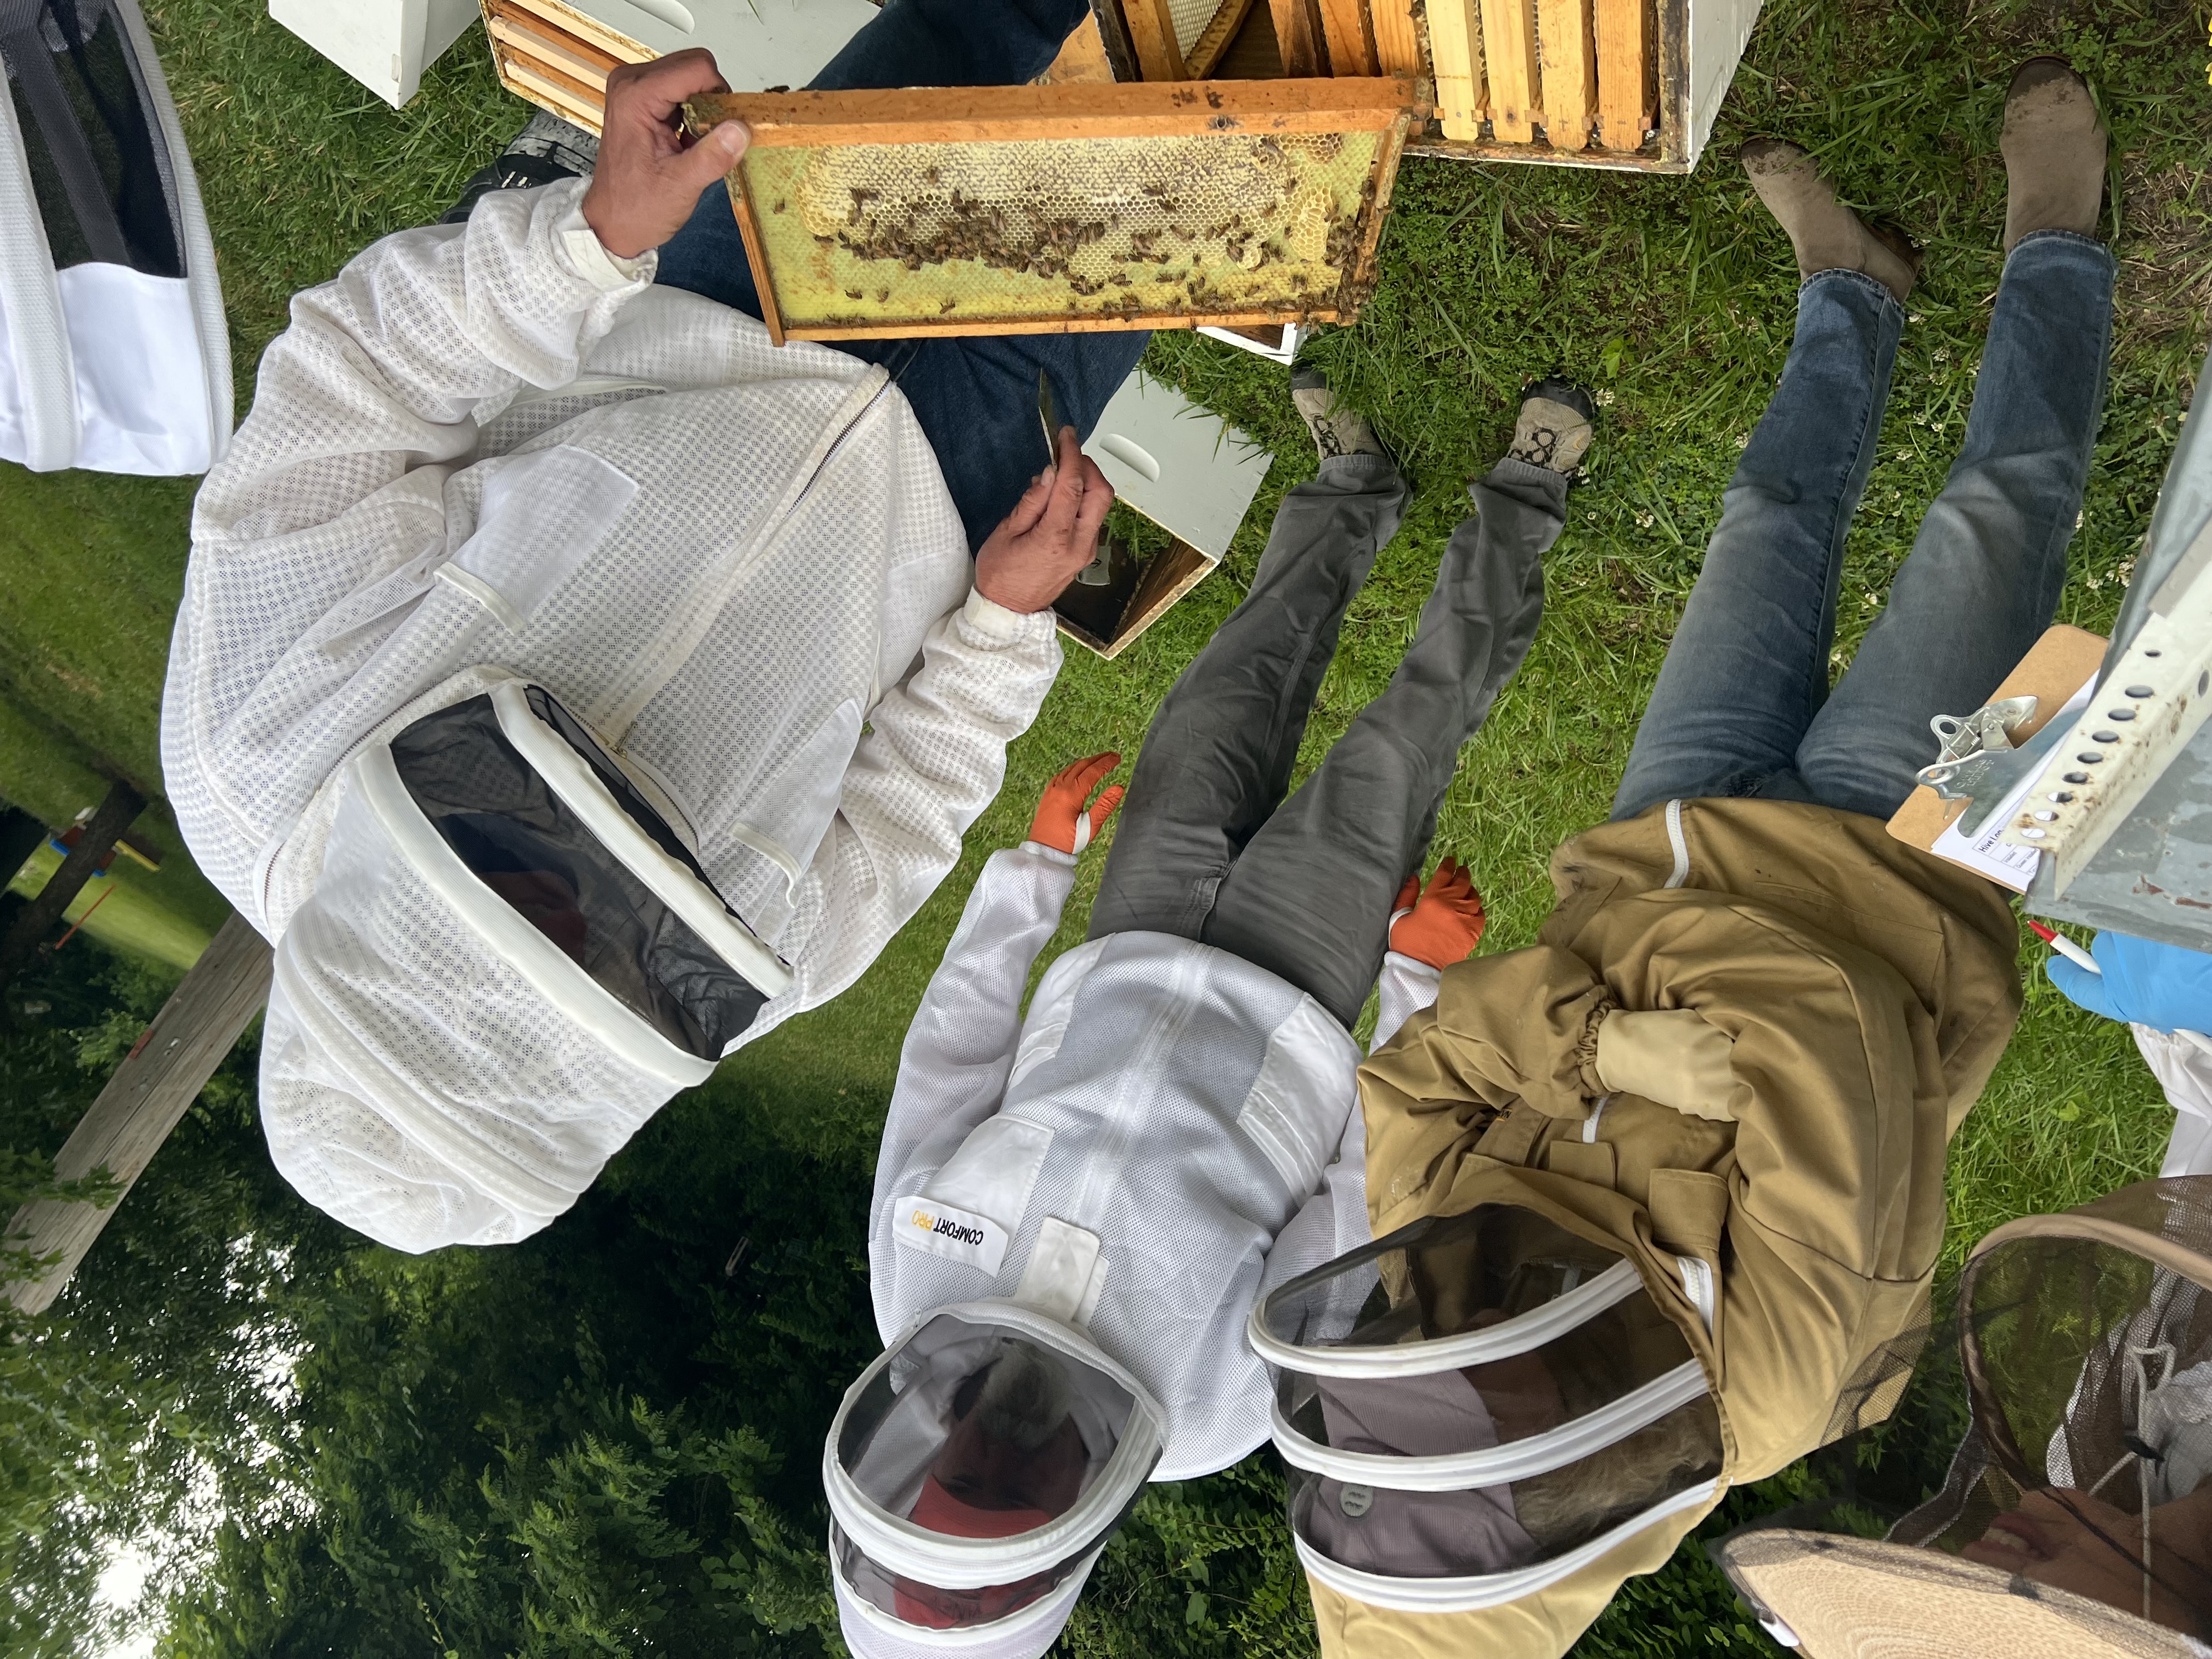 Beekeepers inspecting a frame of bees